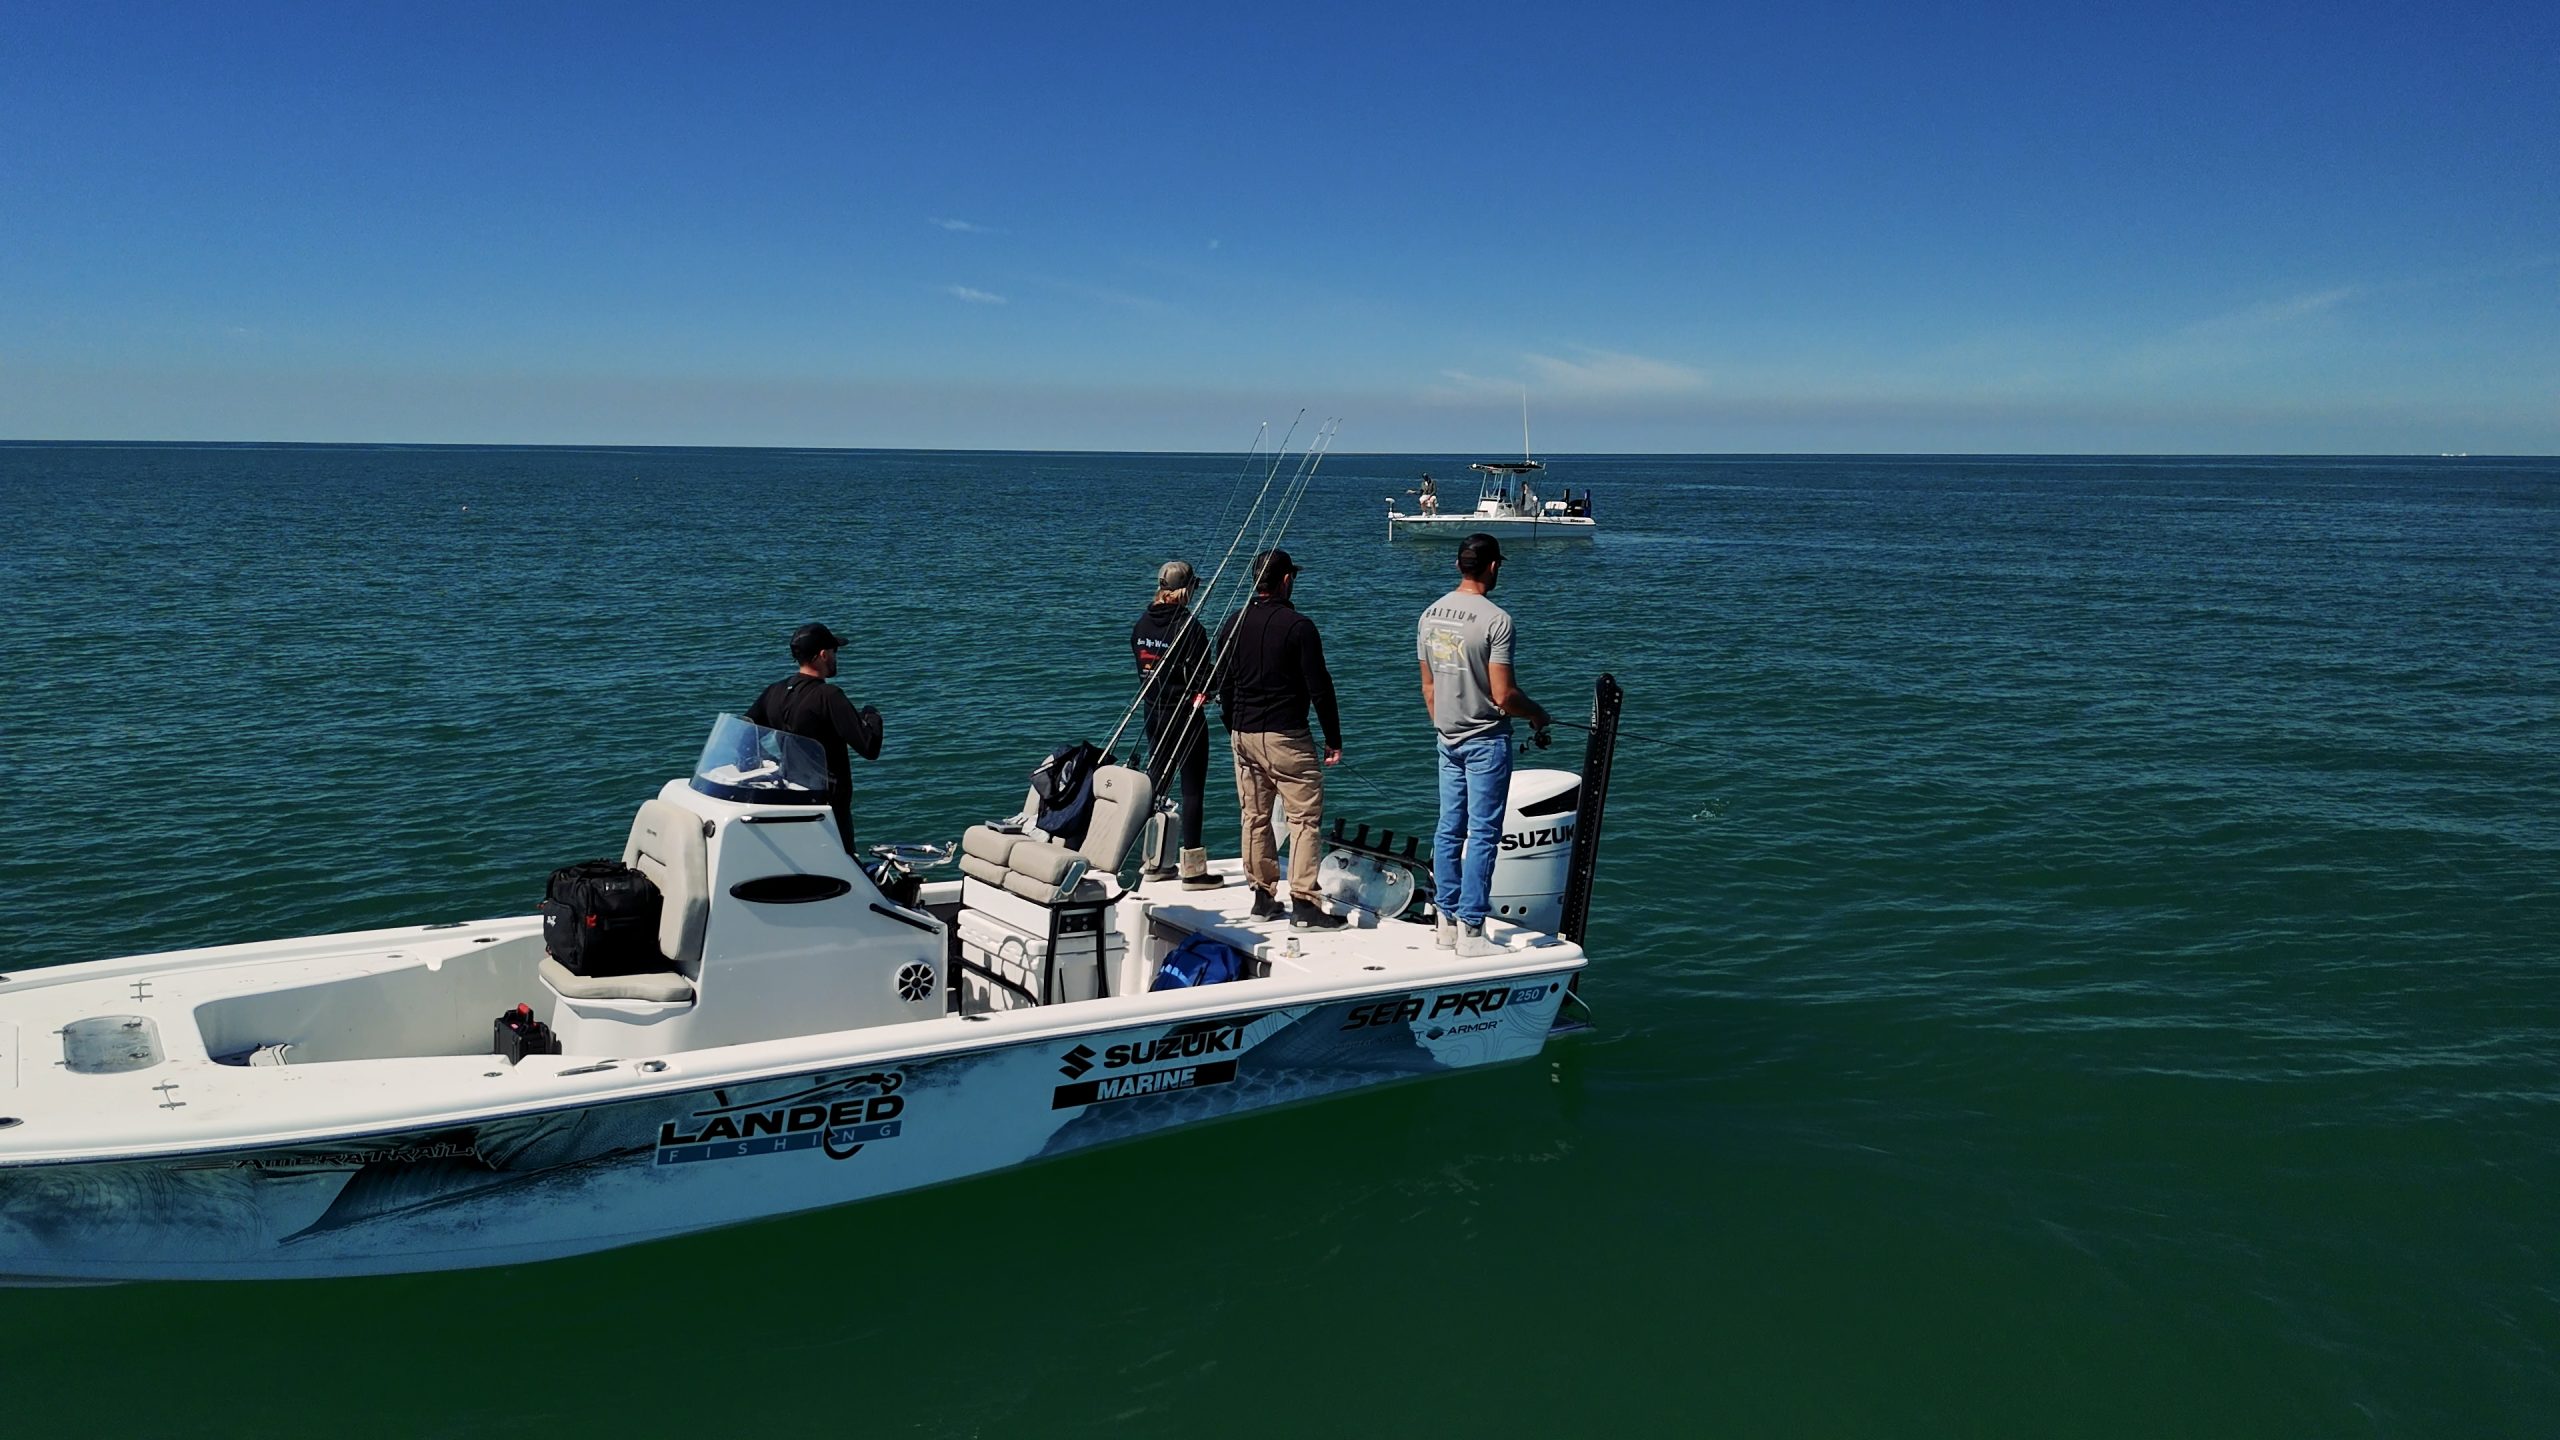 The 10 Best Types of Florida Fishing Charters - Florida Fishing Co